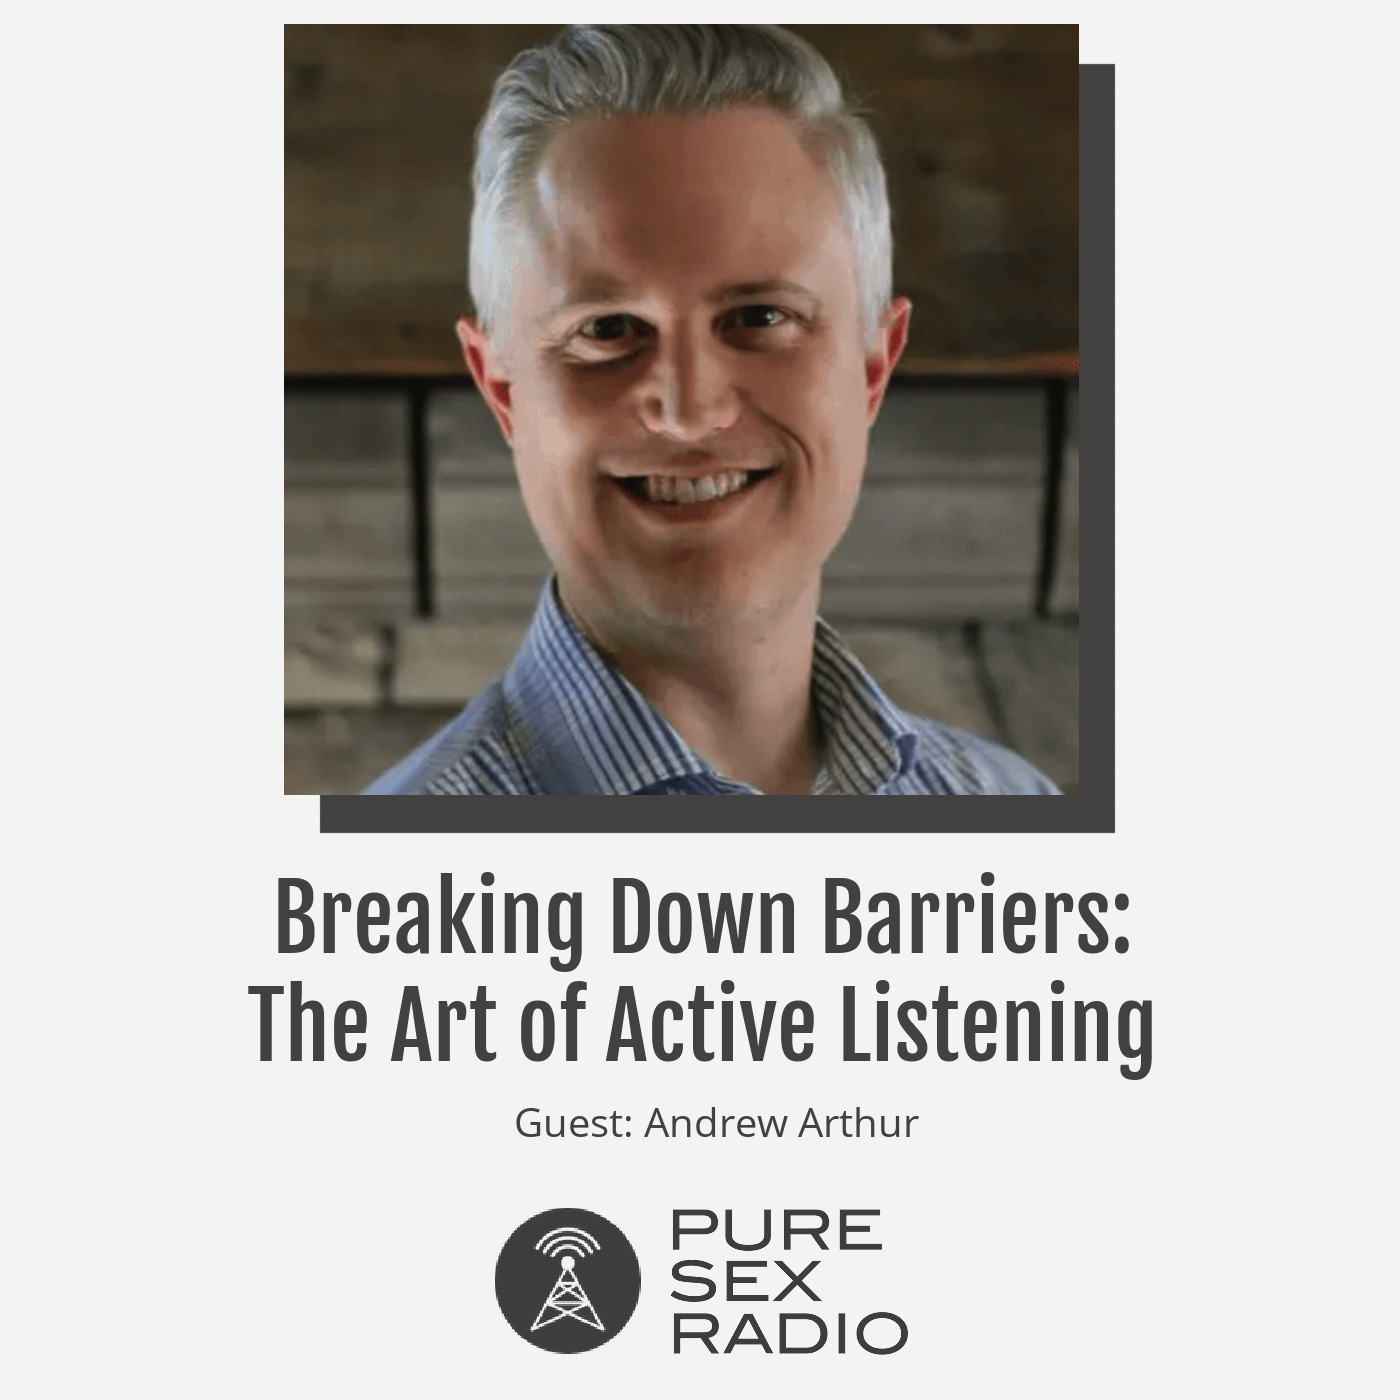 Breaking Down Barriers: The Art of Active Listening